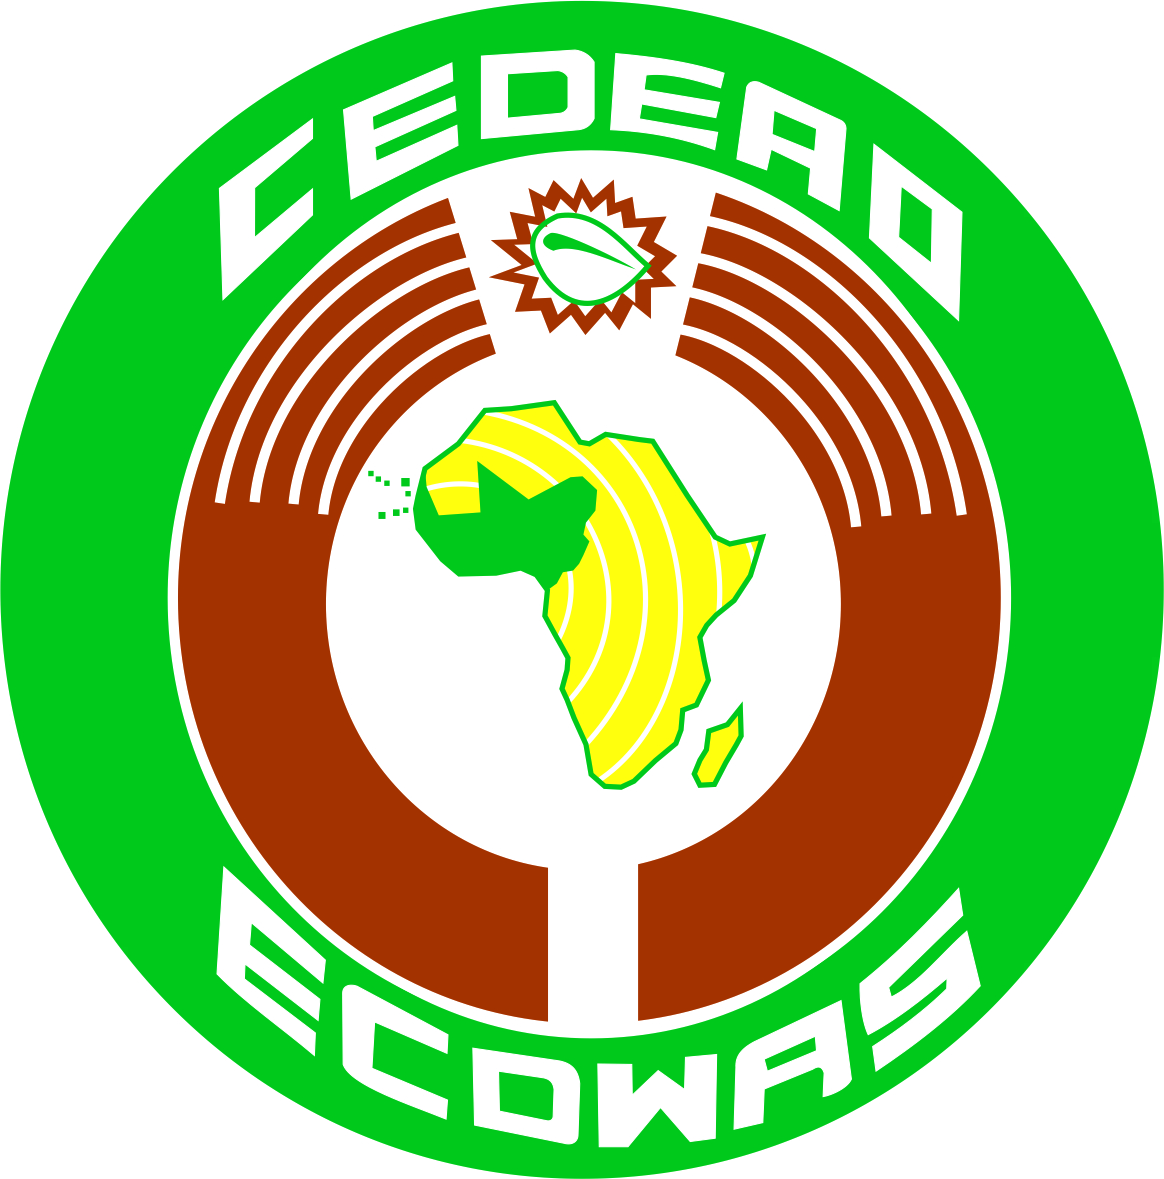 Economic Community of West African States (ECOWAS) Trains the Technical Staff of the ECOWAS Trade Promotion Organizations (TPO) Network on Trade Promotion Tools